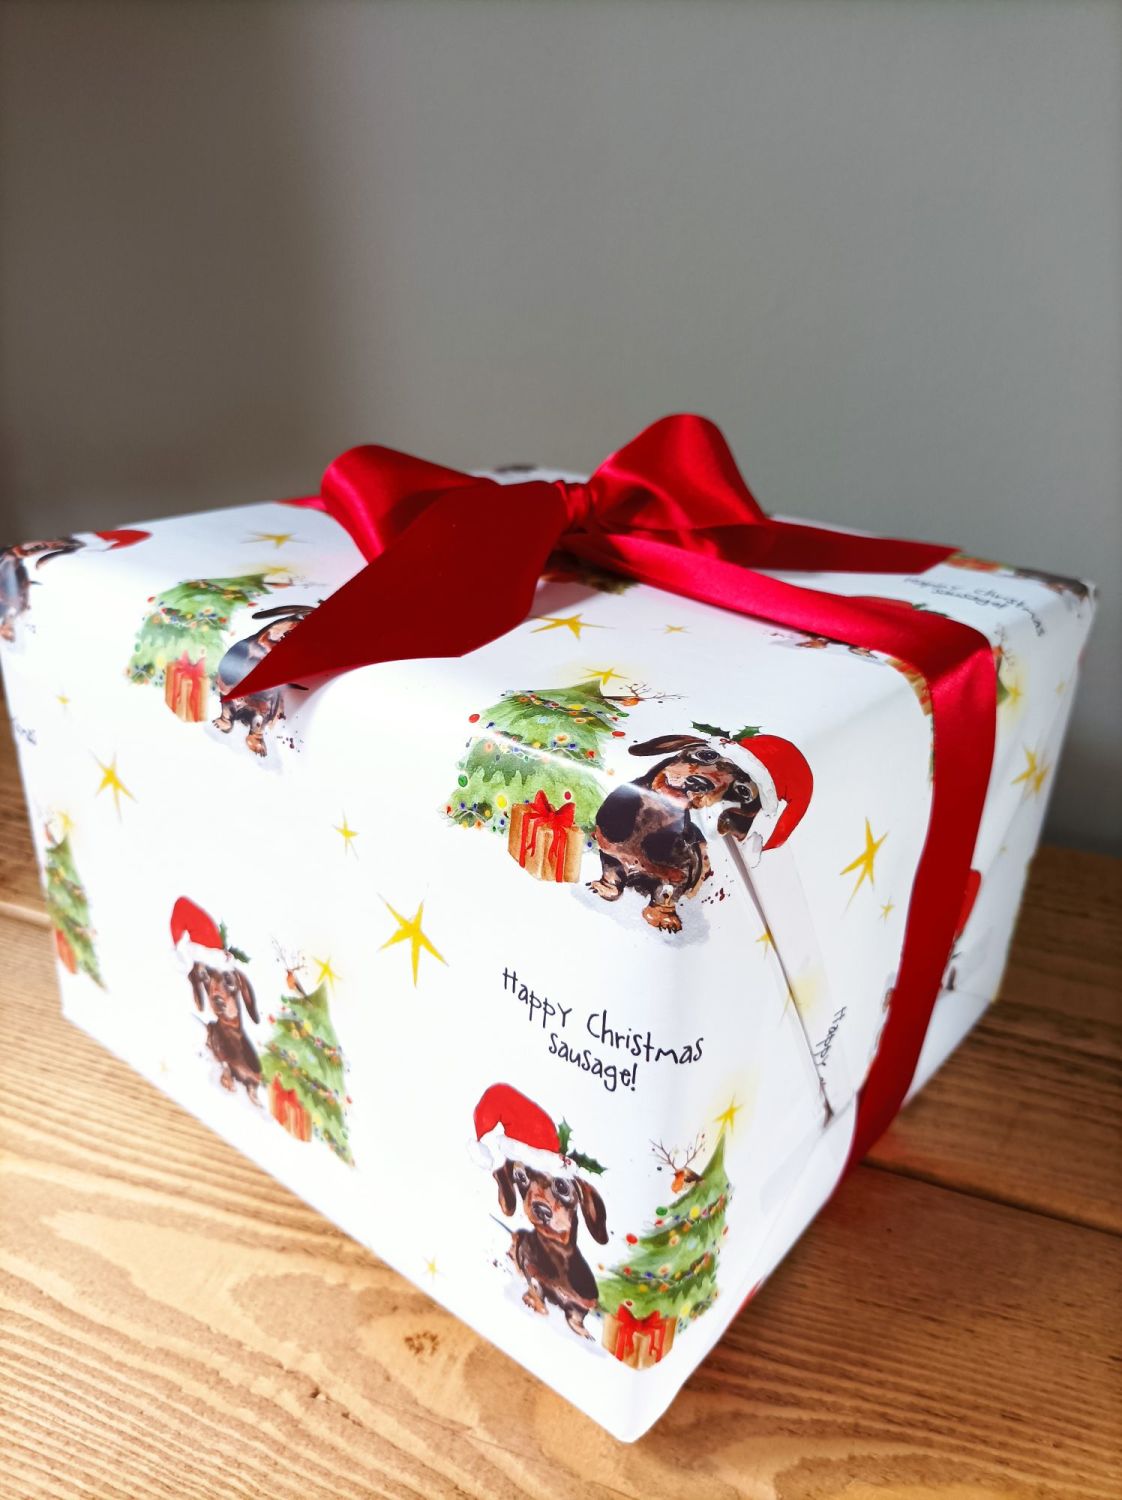 Happy Christmas sausage! - Wrapping paper